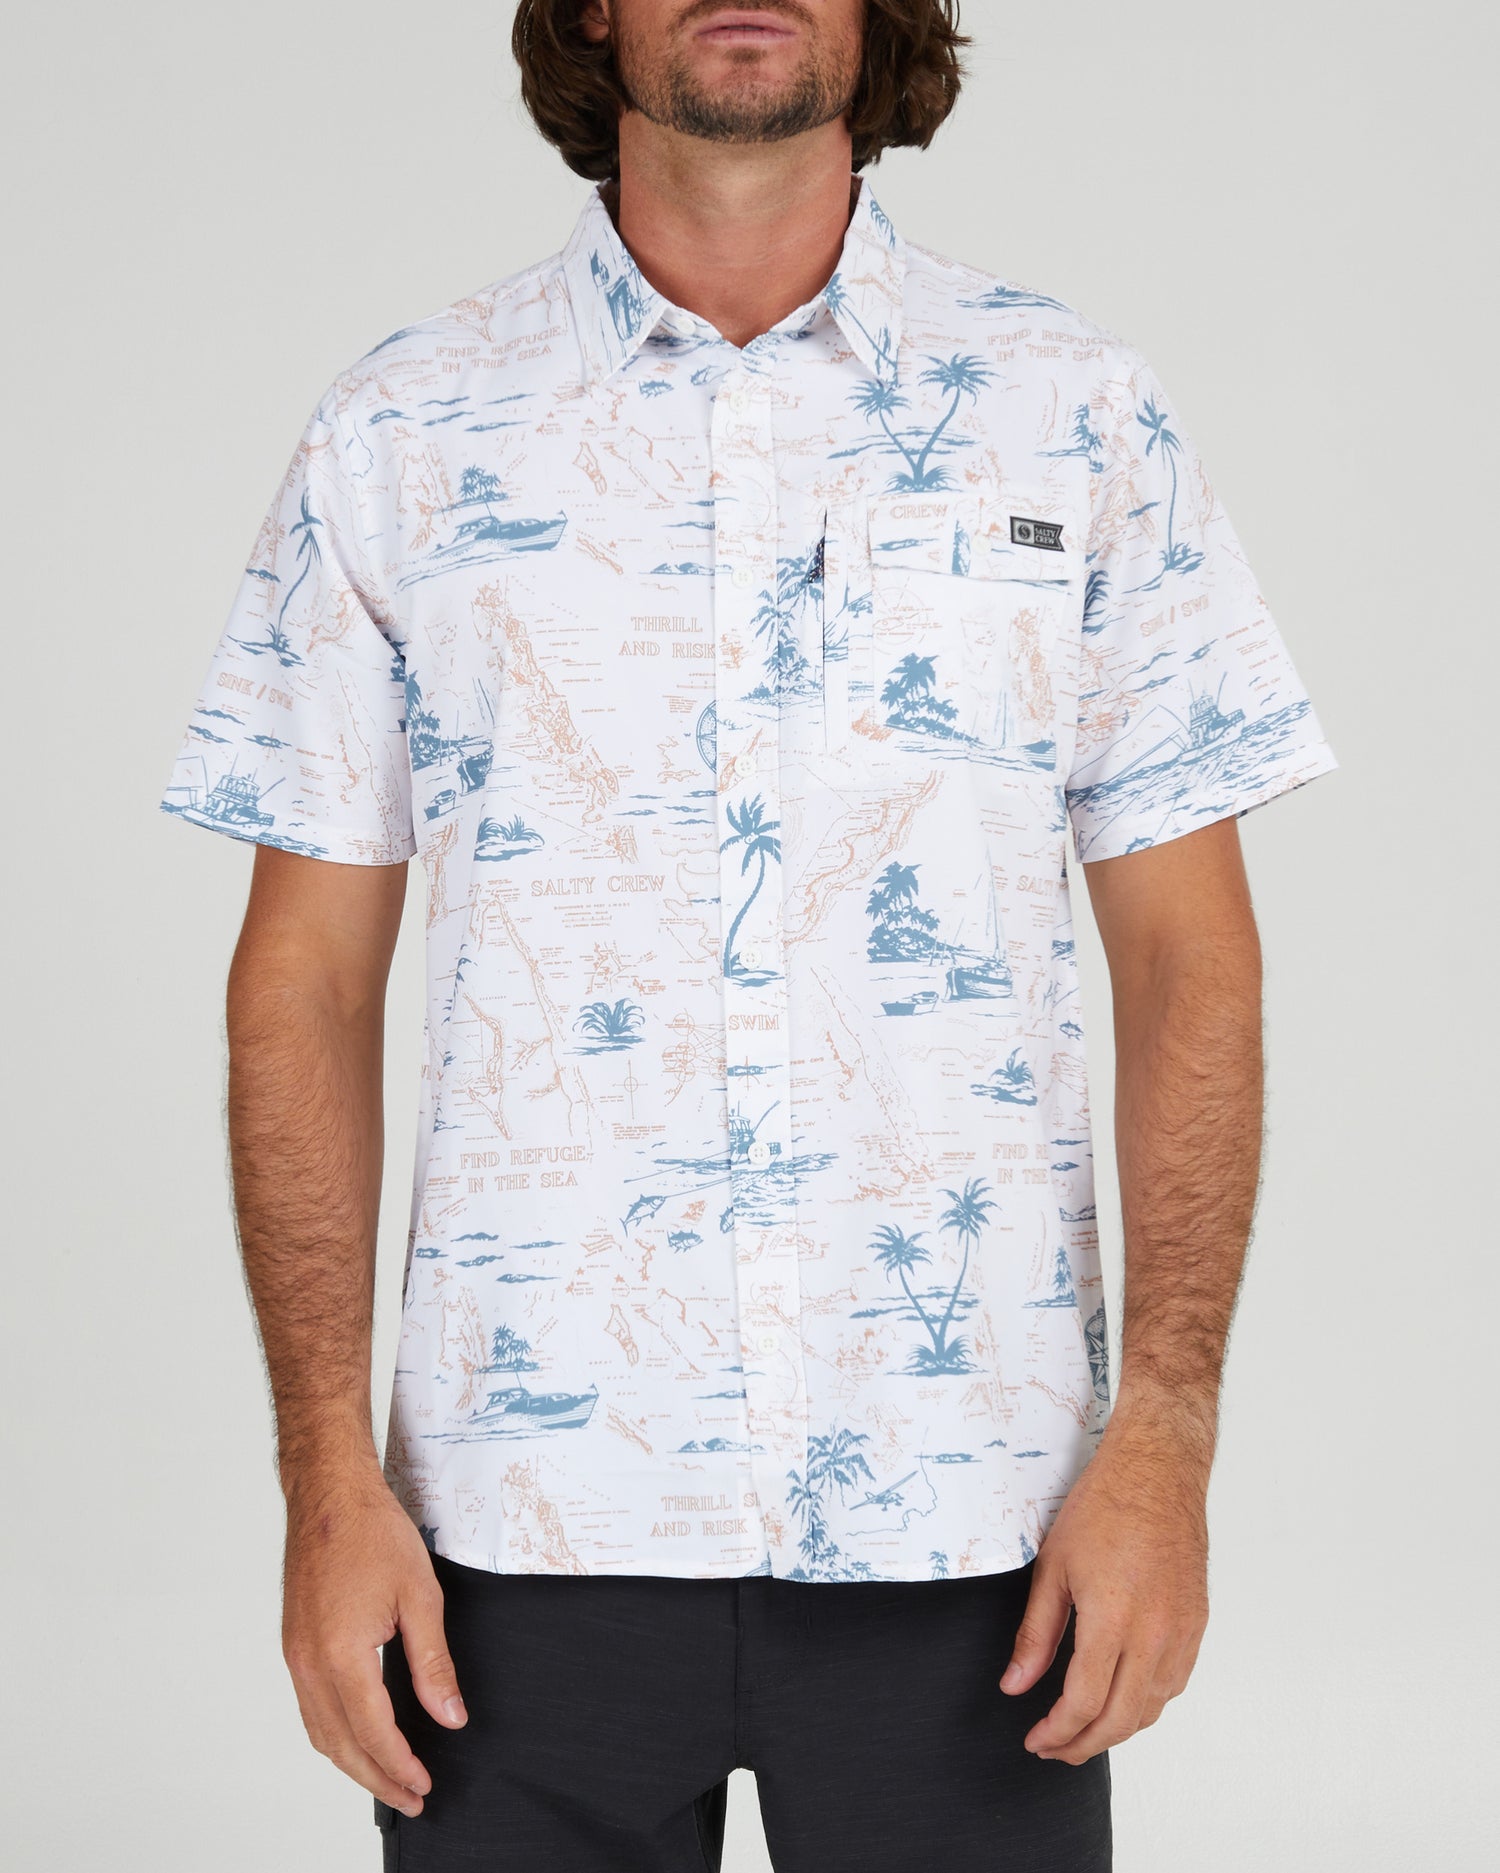 On body front of the Seafarer White S/S Tech Woven